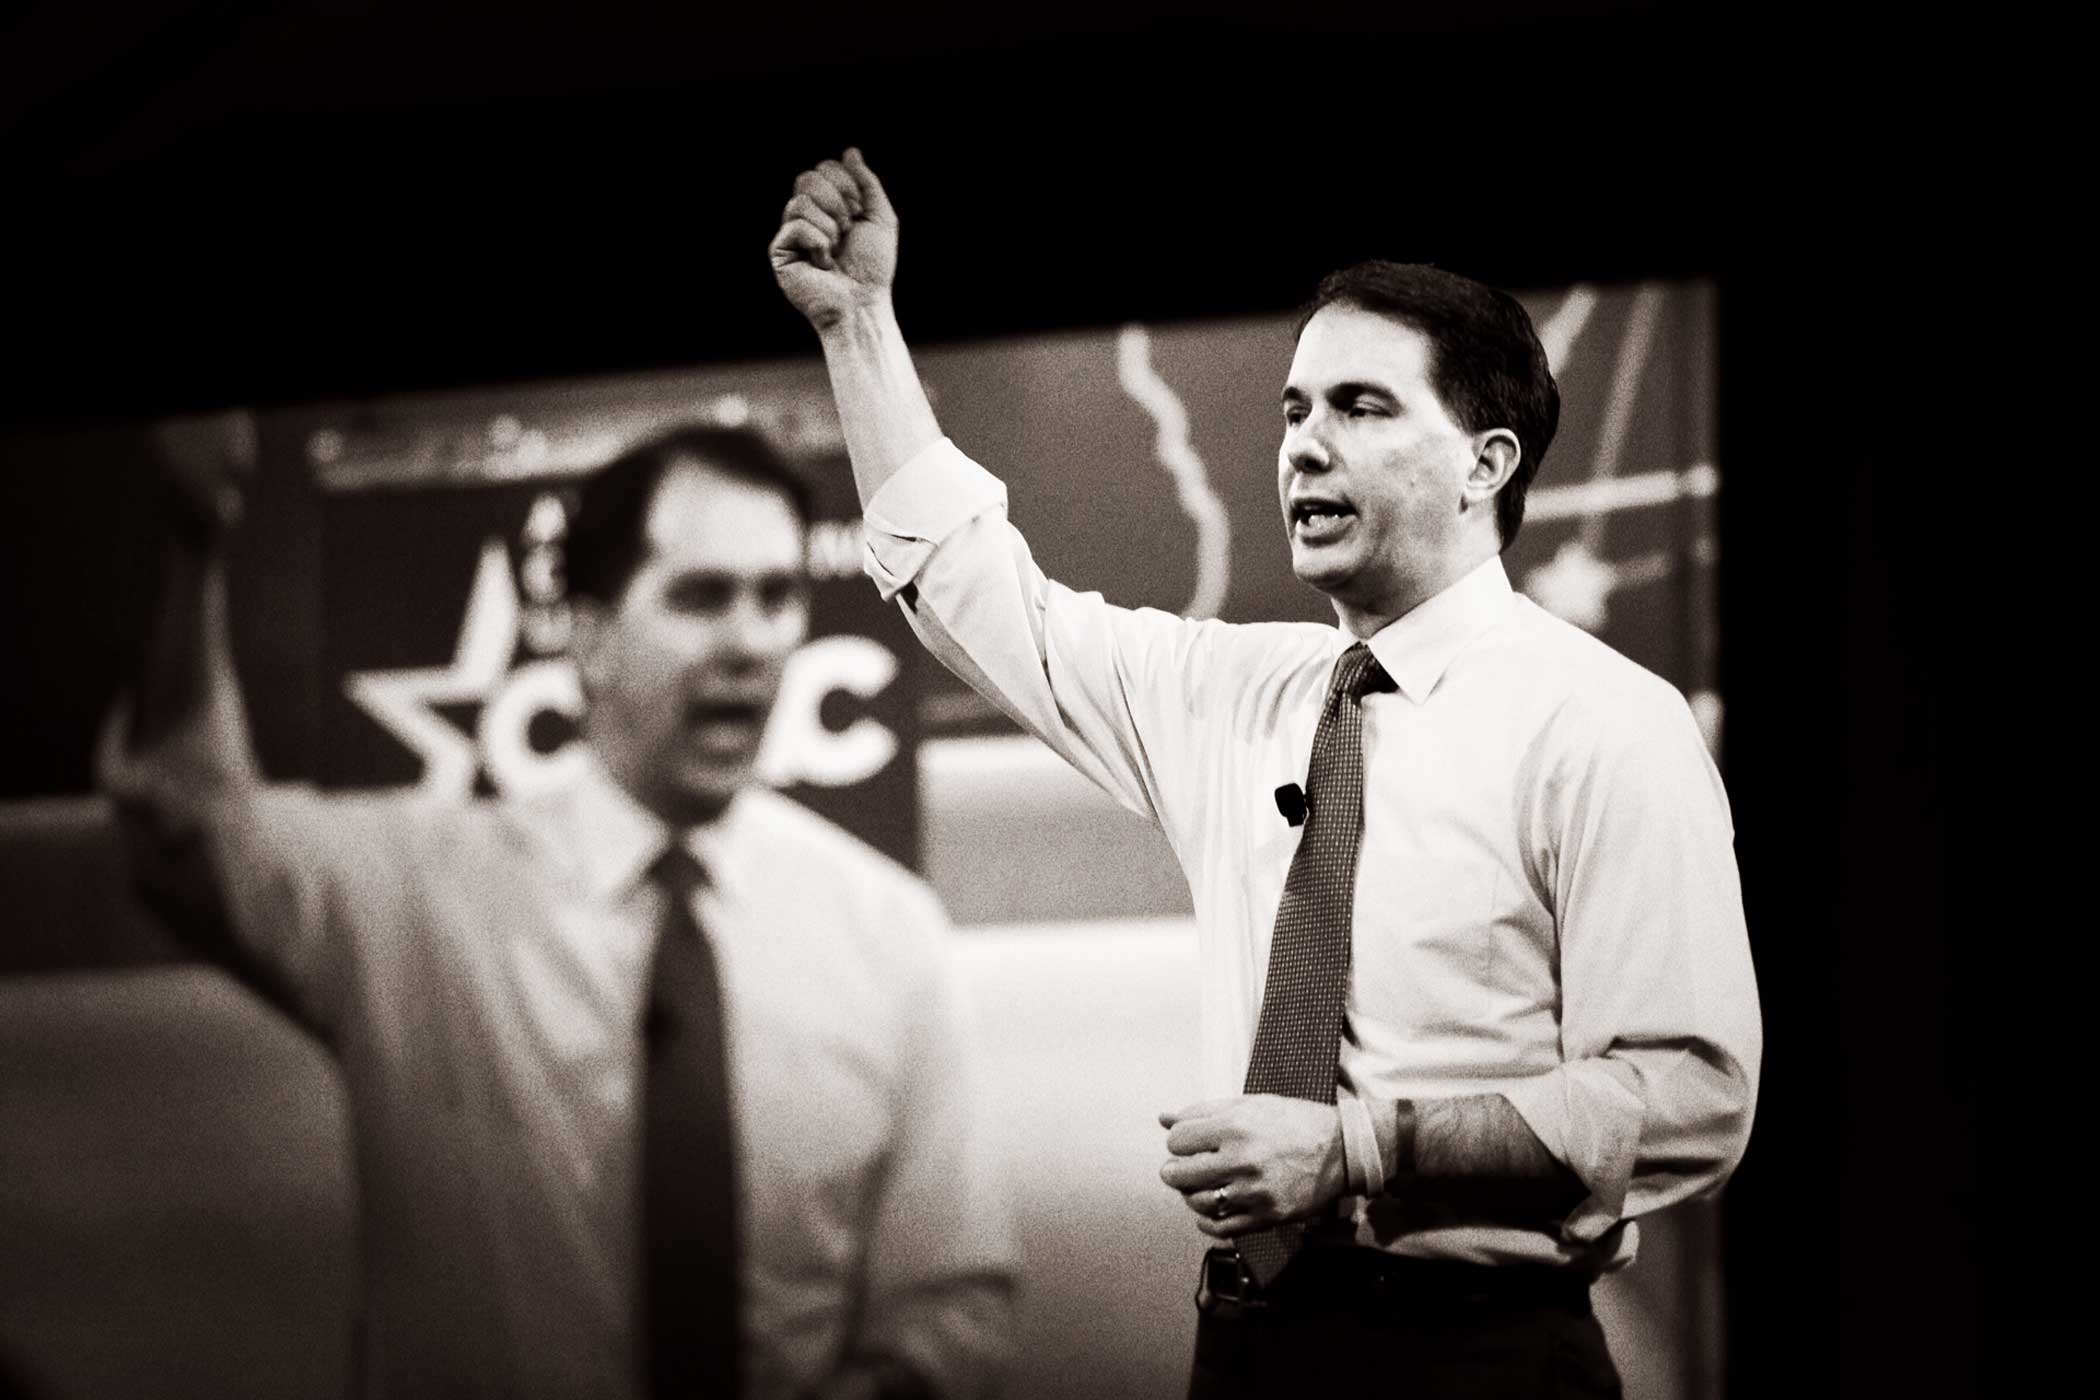 Wisconsin Governor Scott Walker at CPAC in National Harbor, Md., on Feb. 26, 2015. (Mark Peterson—Redux for TIME)